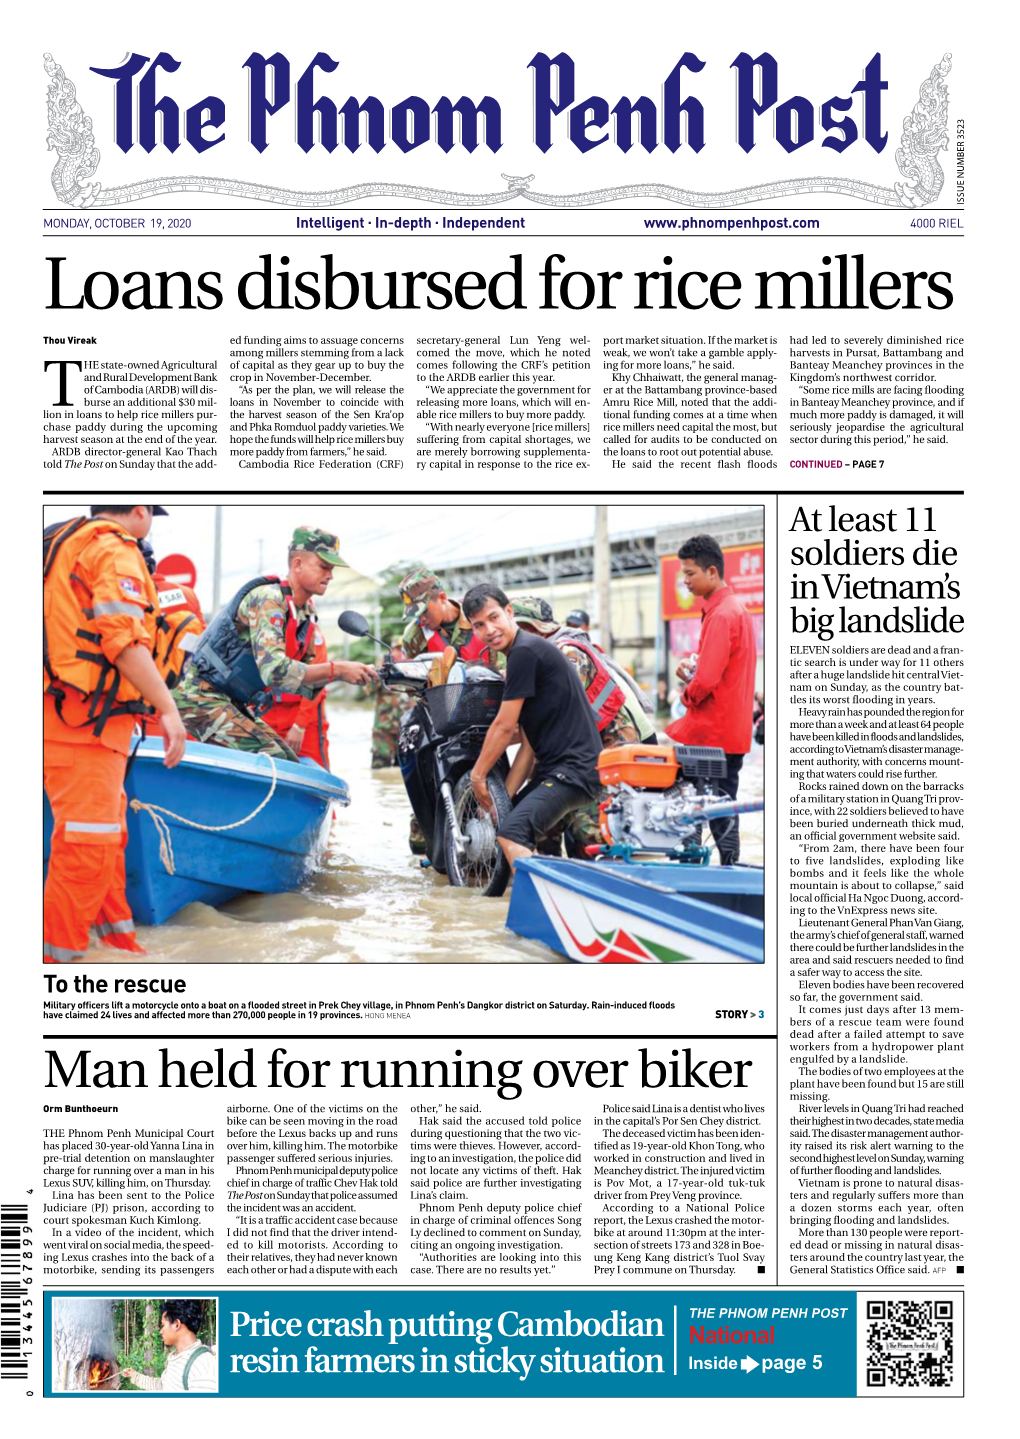 Loans Disbursed for Rice Millers Thou Vireak Ed Funding Aims to Assuage Concerns Secretary-General Lun Yeng Wel- Port Market Situation